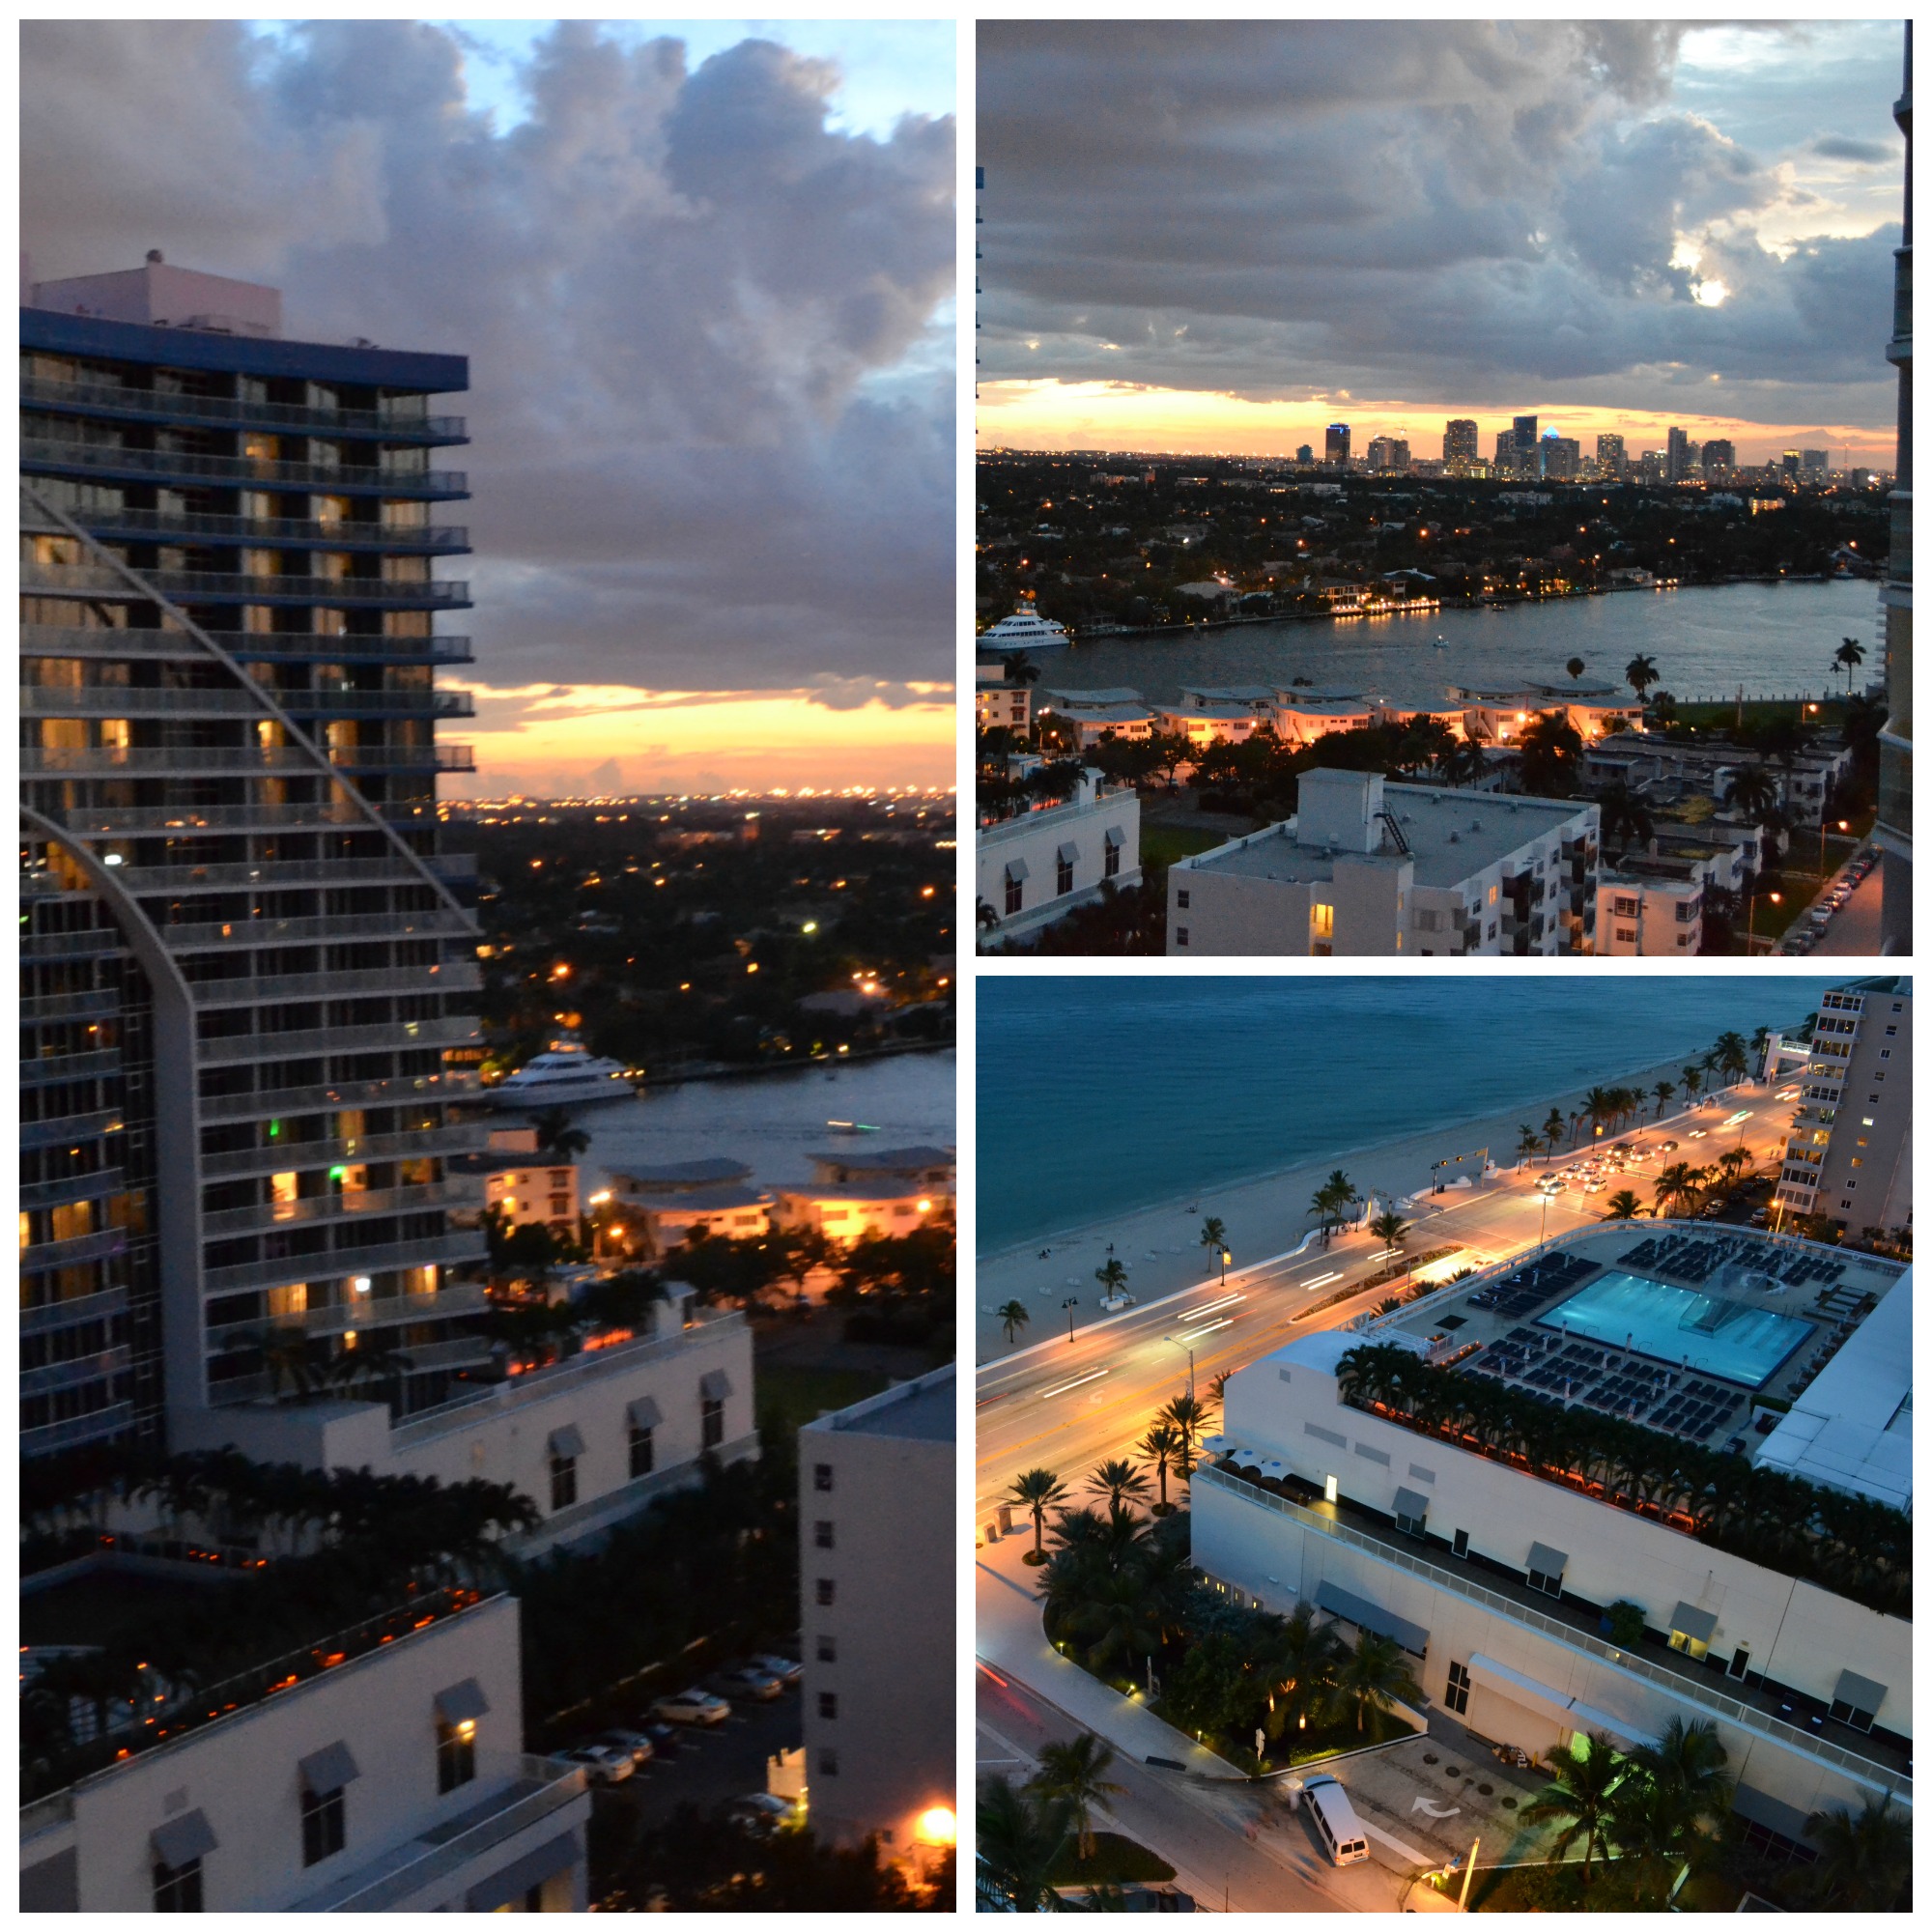 Views from the Hilton Fort Lauderdale